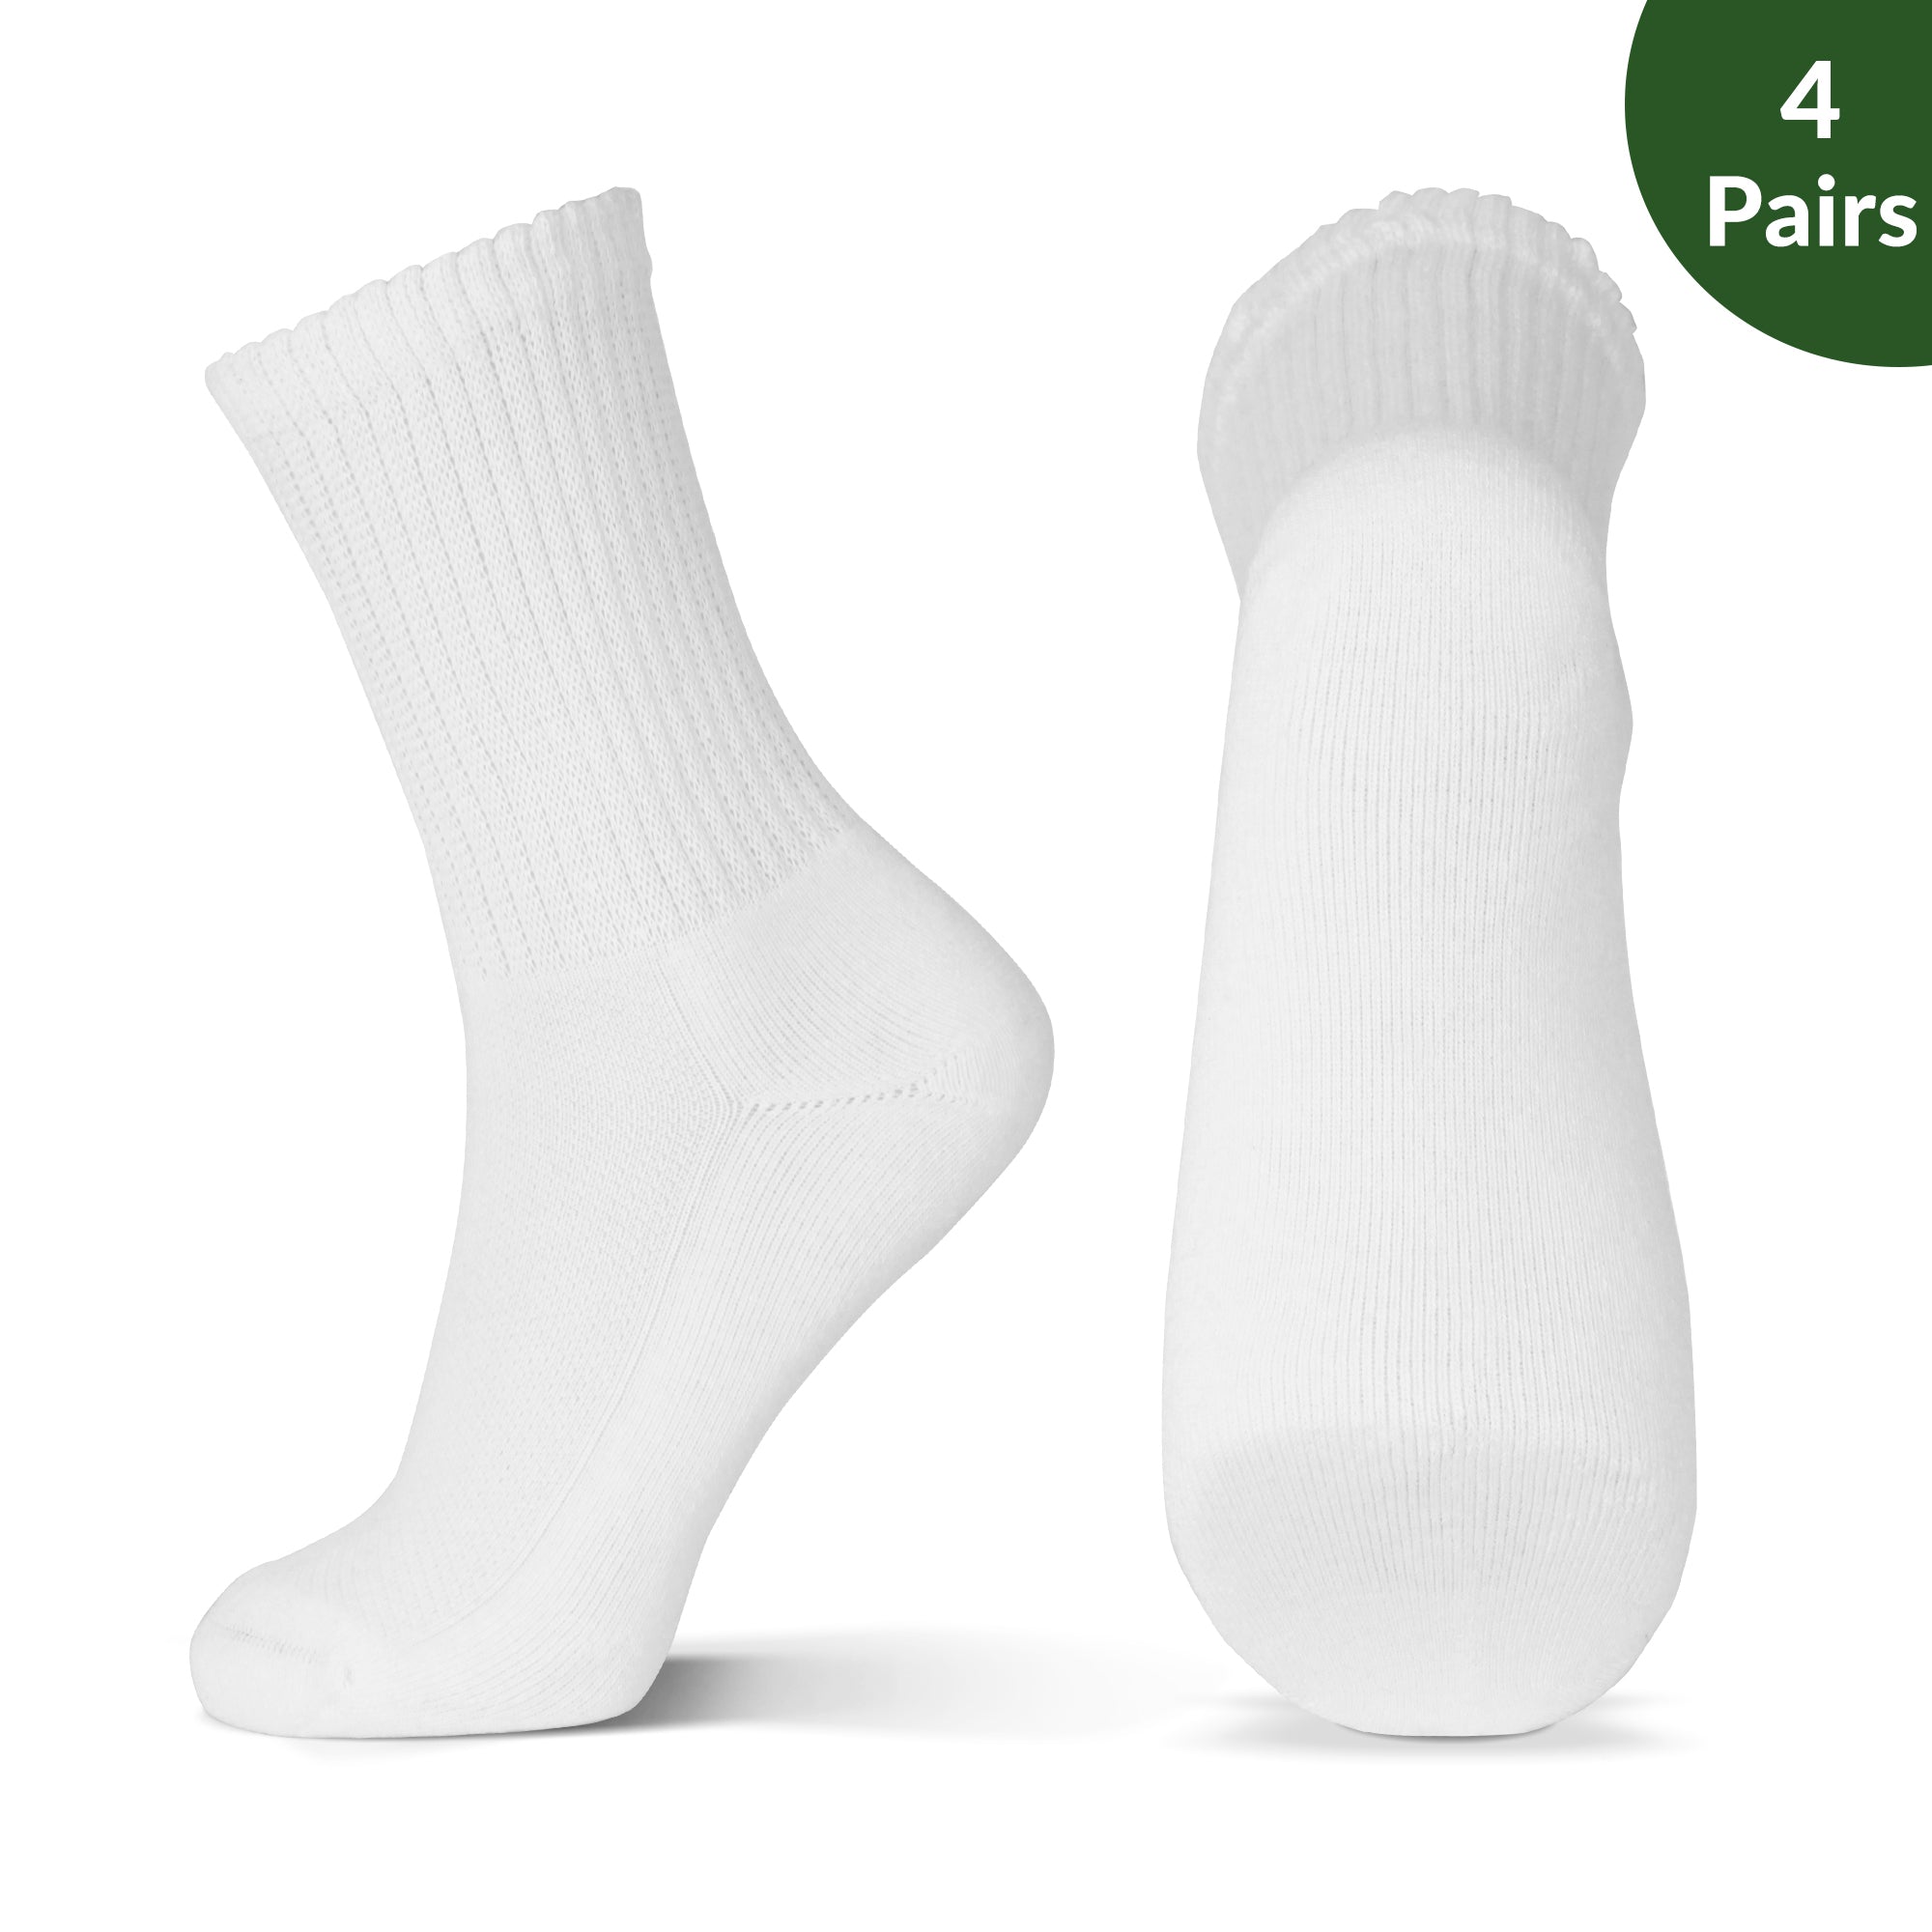 Thigh High Graduated Compression Opaque Stockings, Open-Toe 20-30mmHg Firm  Medical Support Socks